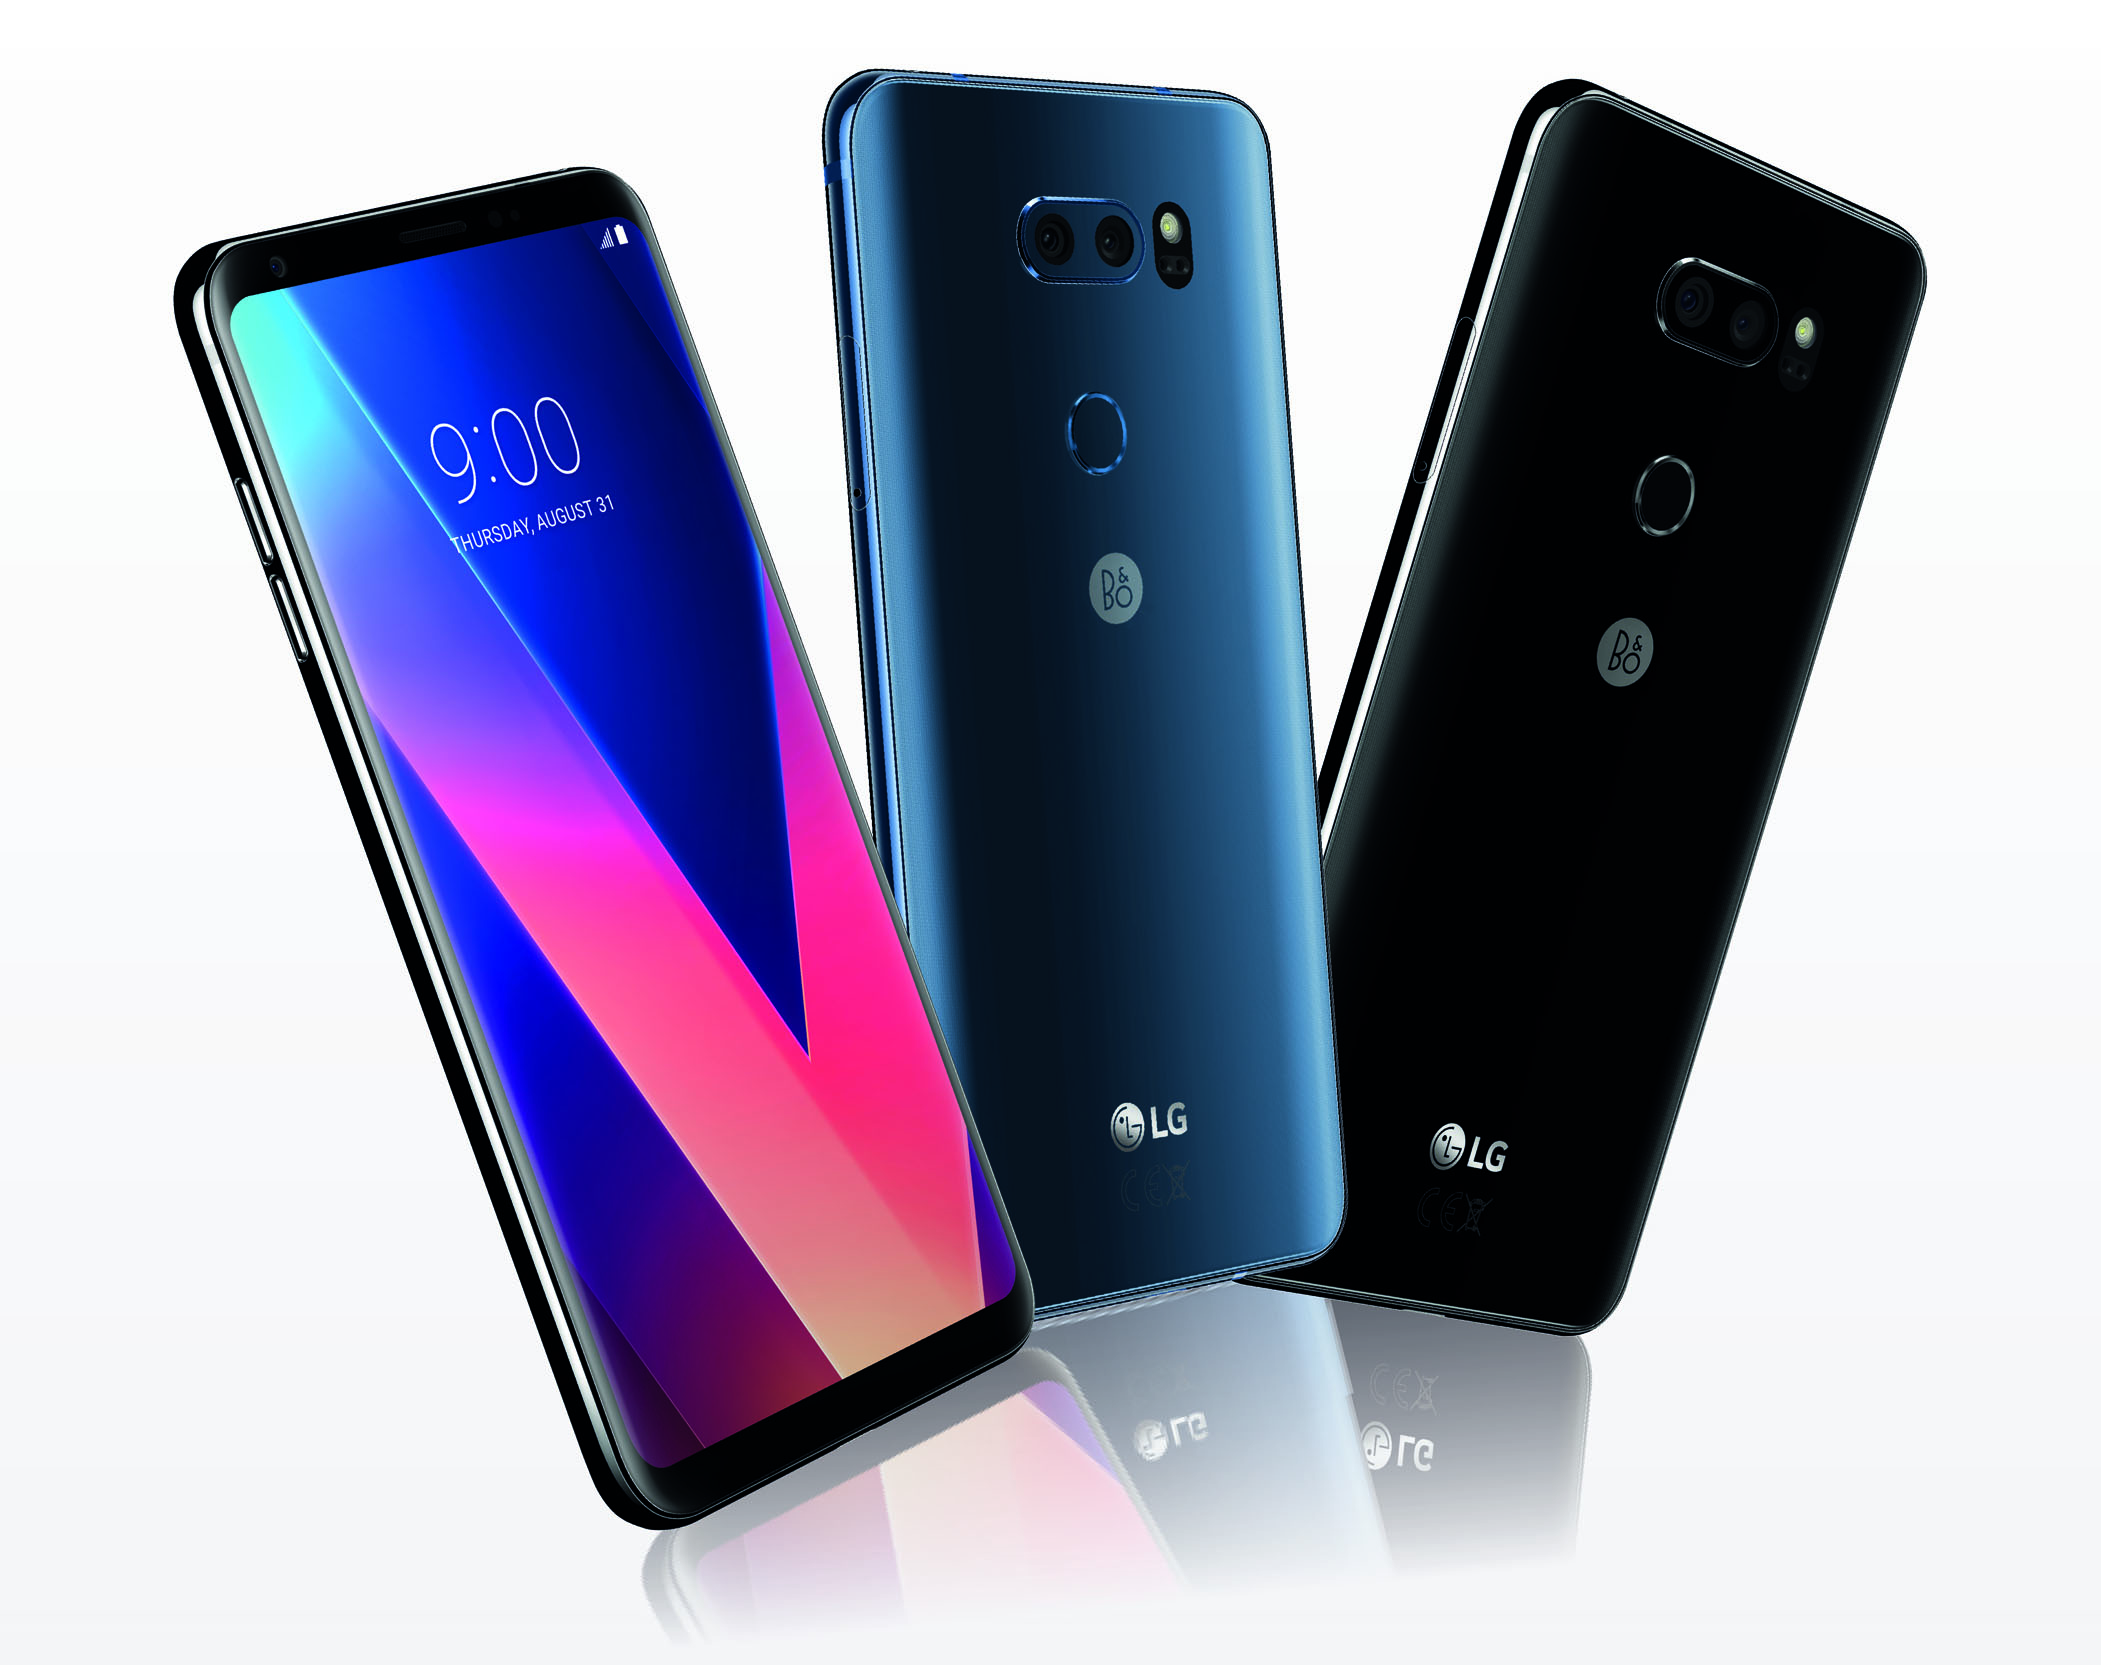 LG’s Immersive OLED Technology is Now Available on Mobile with the V30+